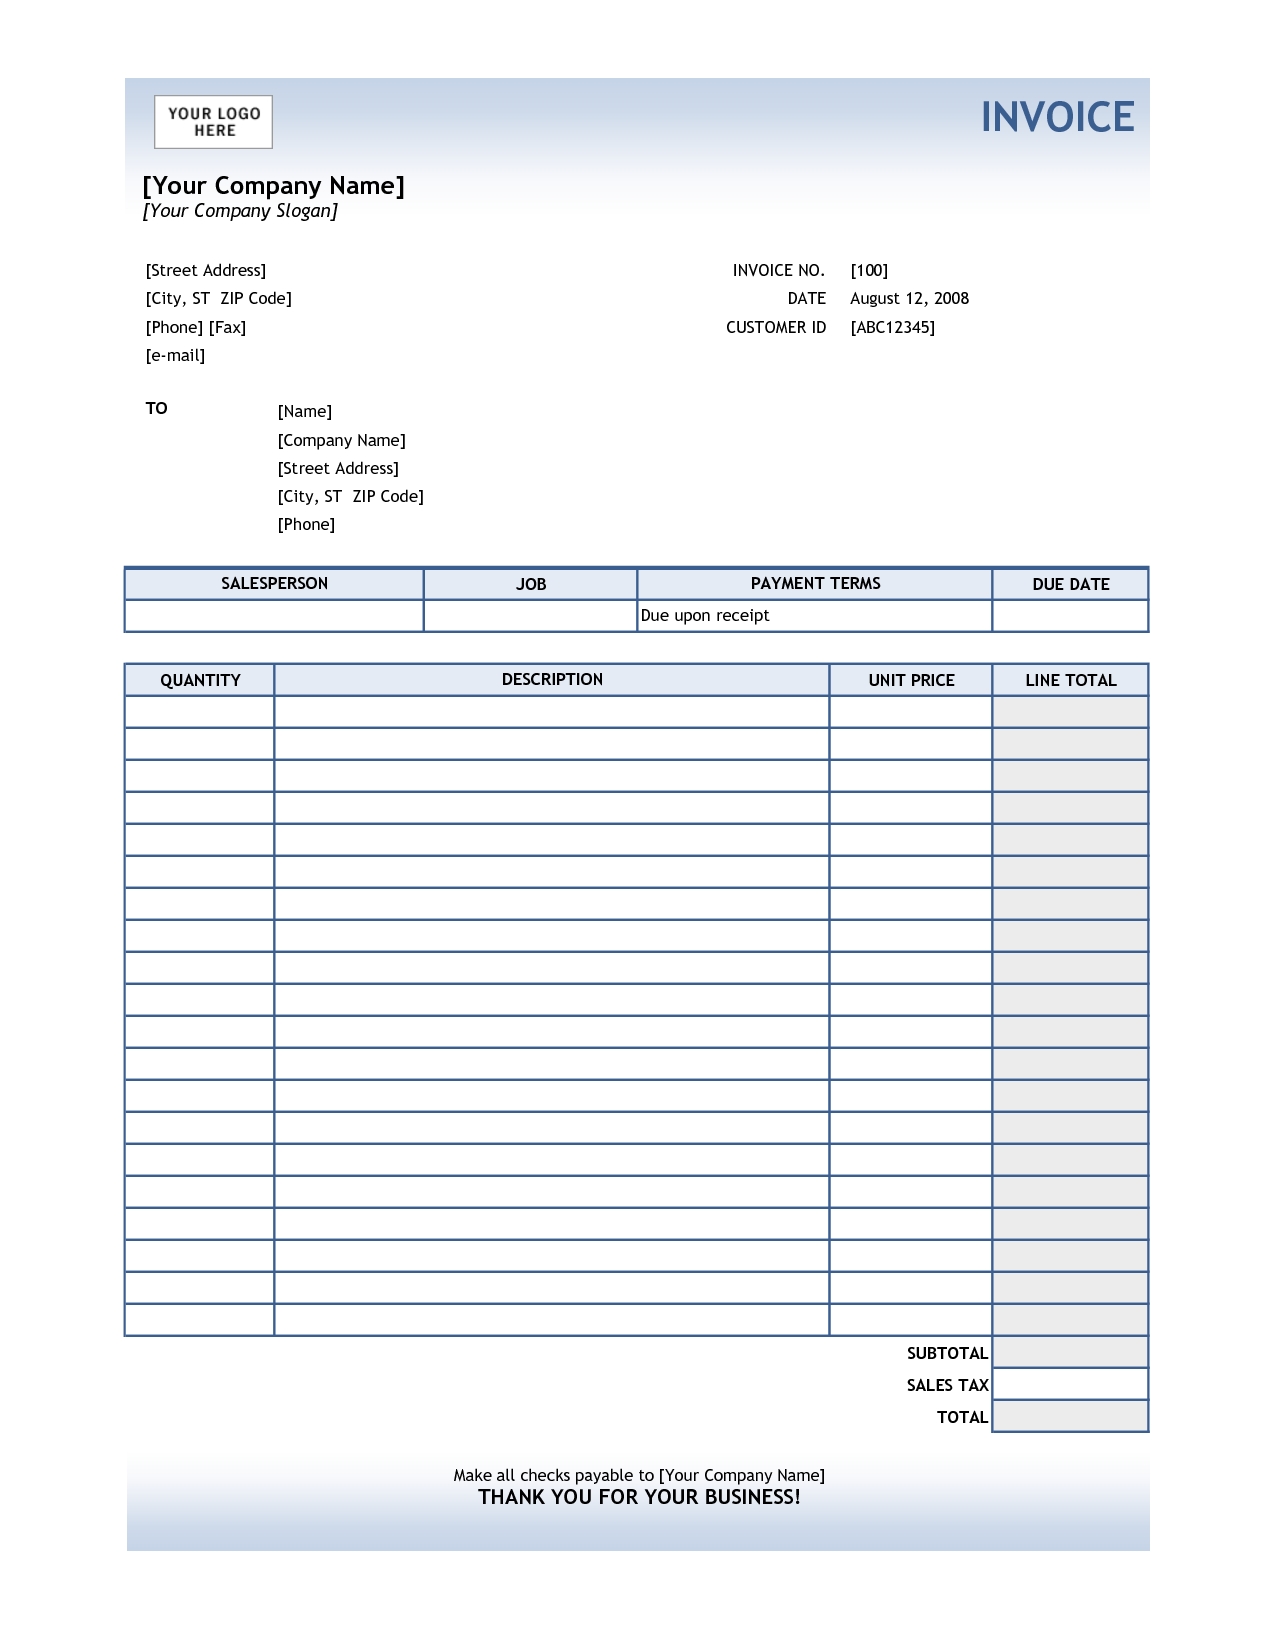 invoice template in excel invoice sample invoice templates sample invoice excel template